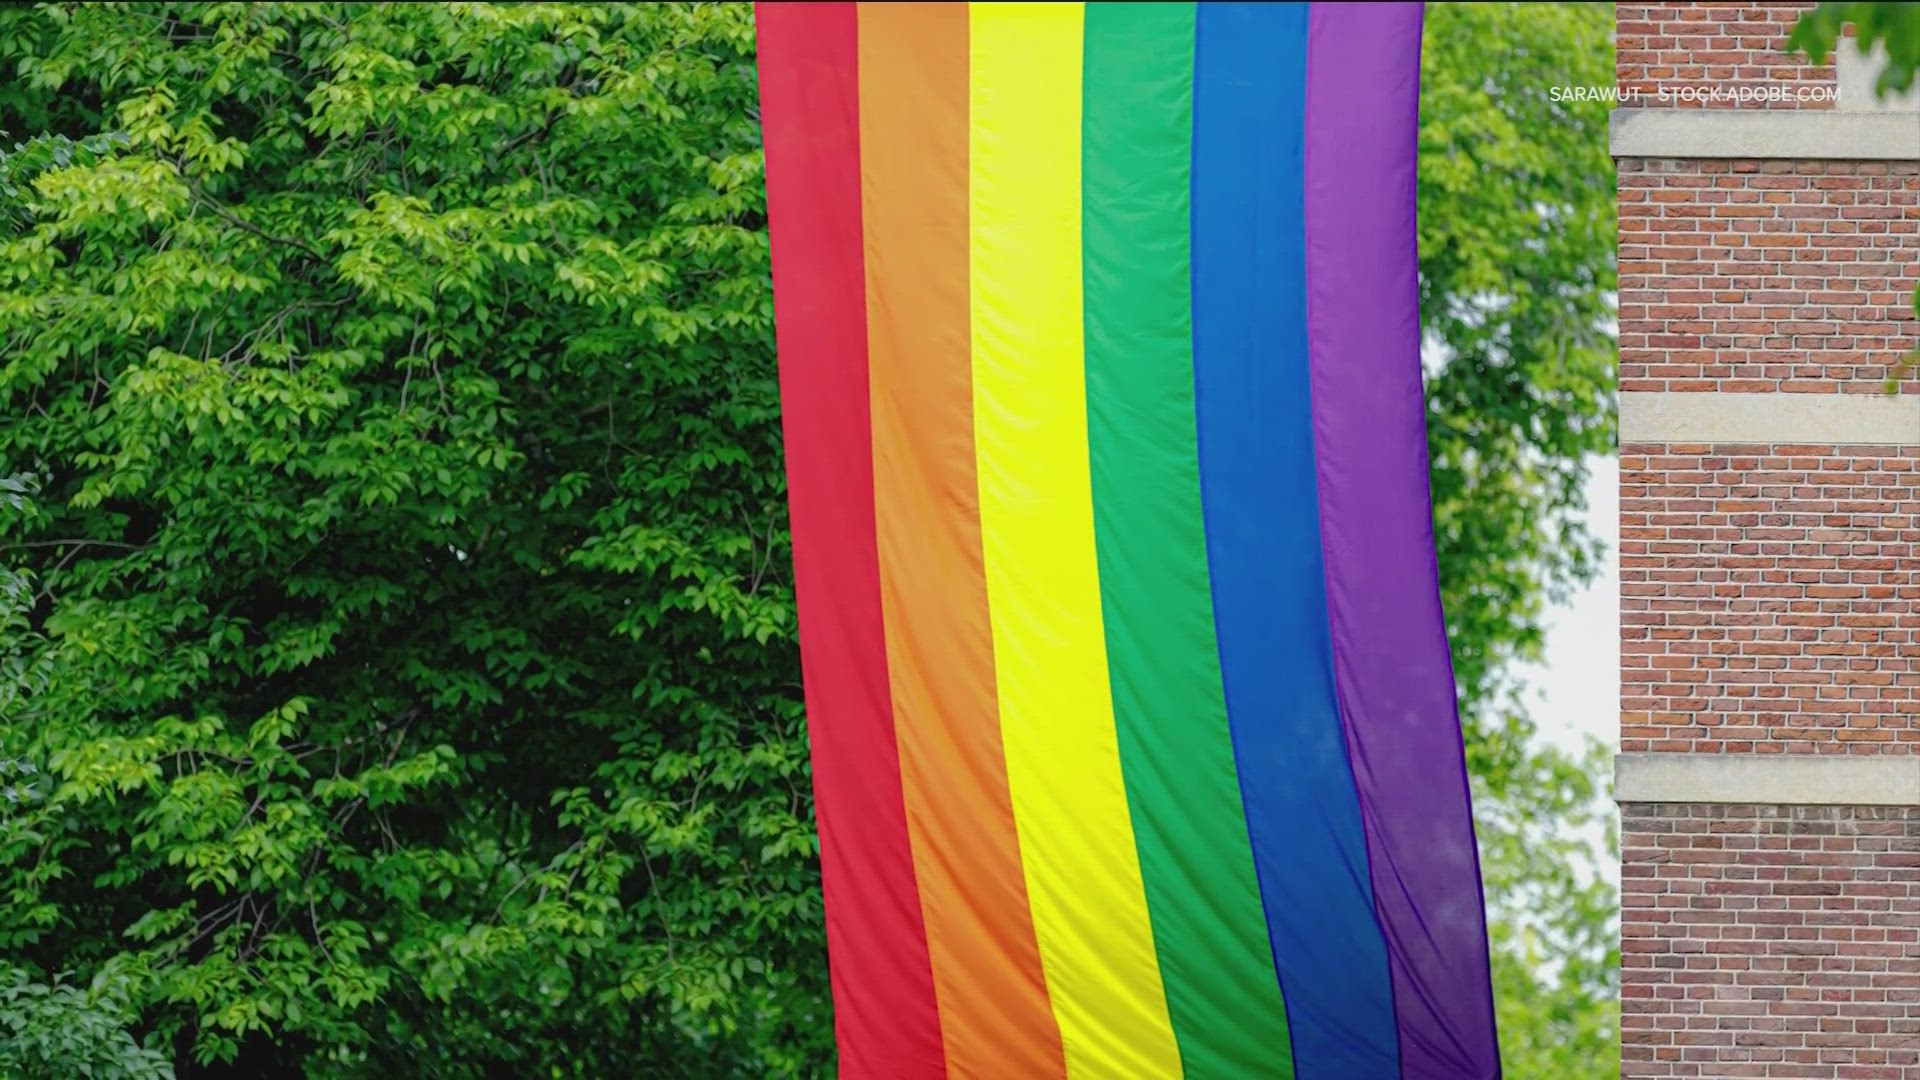 The group "Georgetown Pride" will host a block party across from the Georgetown Public Library starting Thursday night at 7:30.